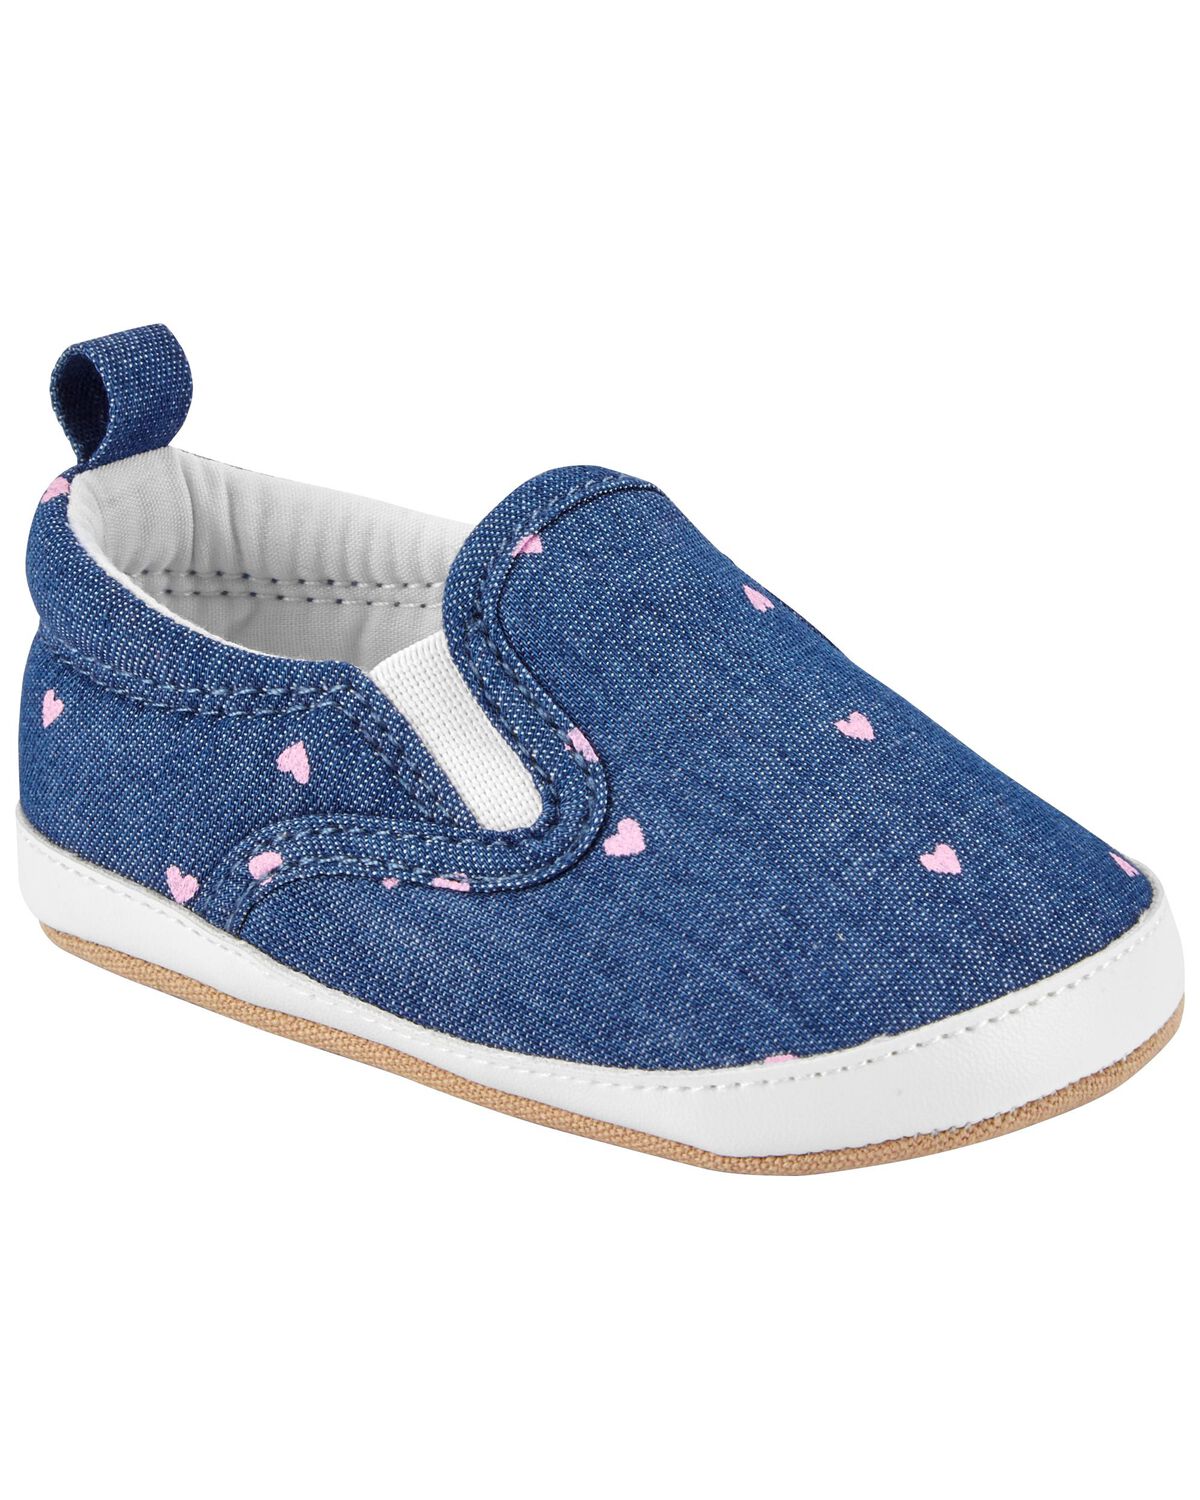 Chambray Casual Baby Shoes